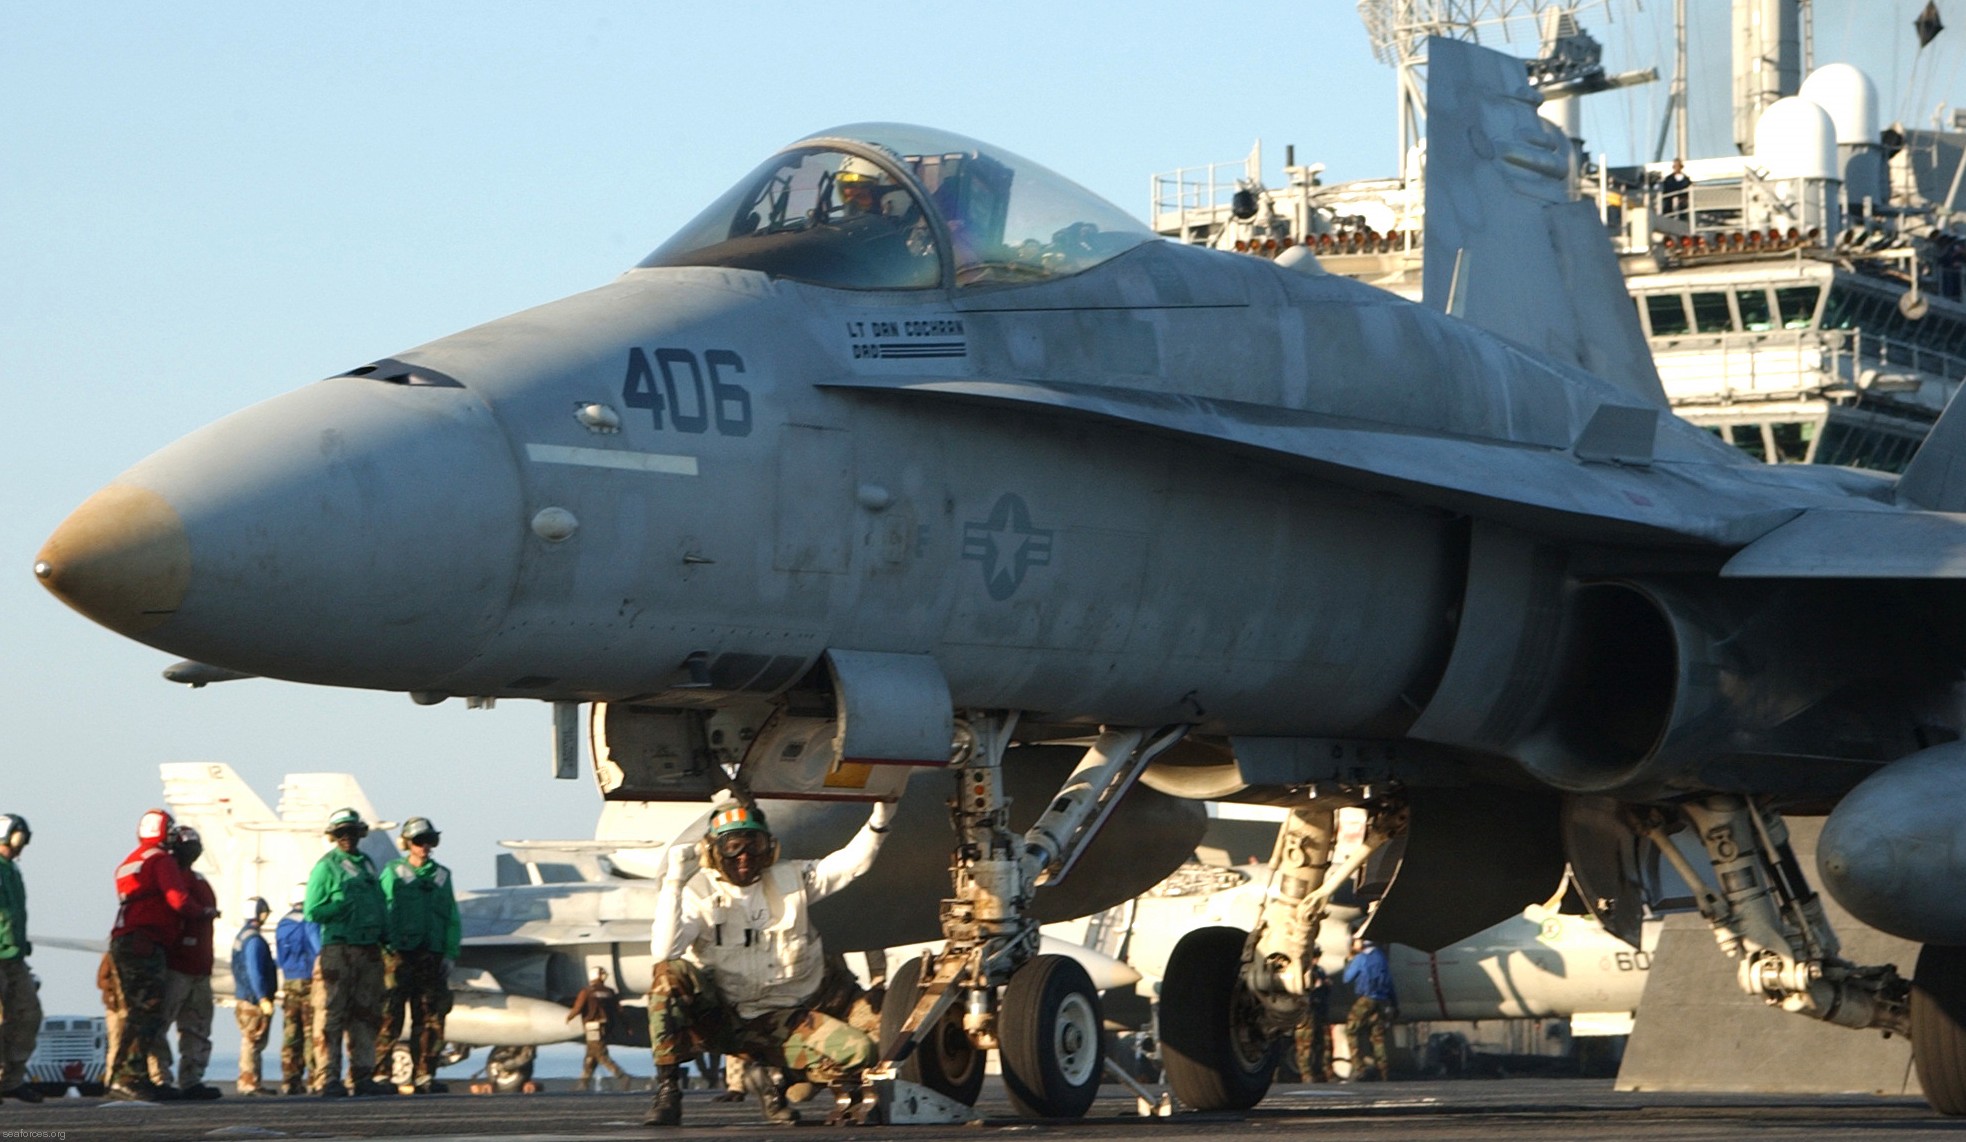 vfa-195 dambusters strike fighter squadron navy f/a-18c hornet carrier air wing cvw-5 uss kitty hawk cv-63 82